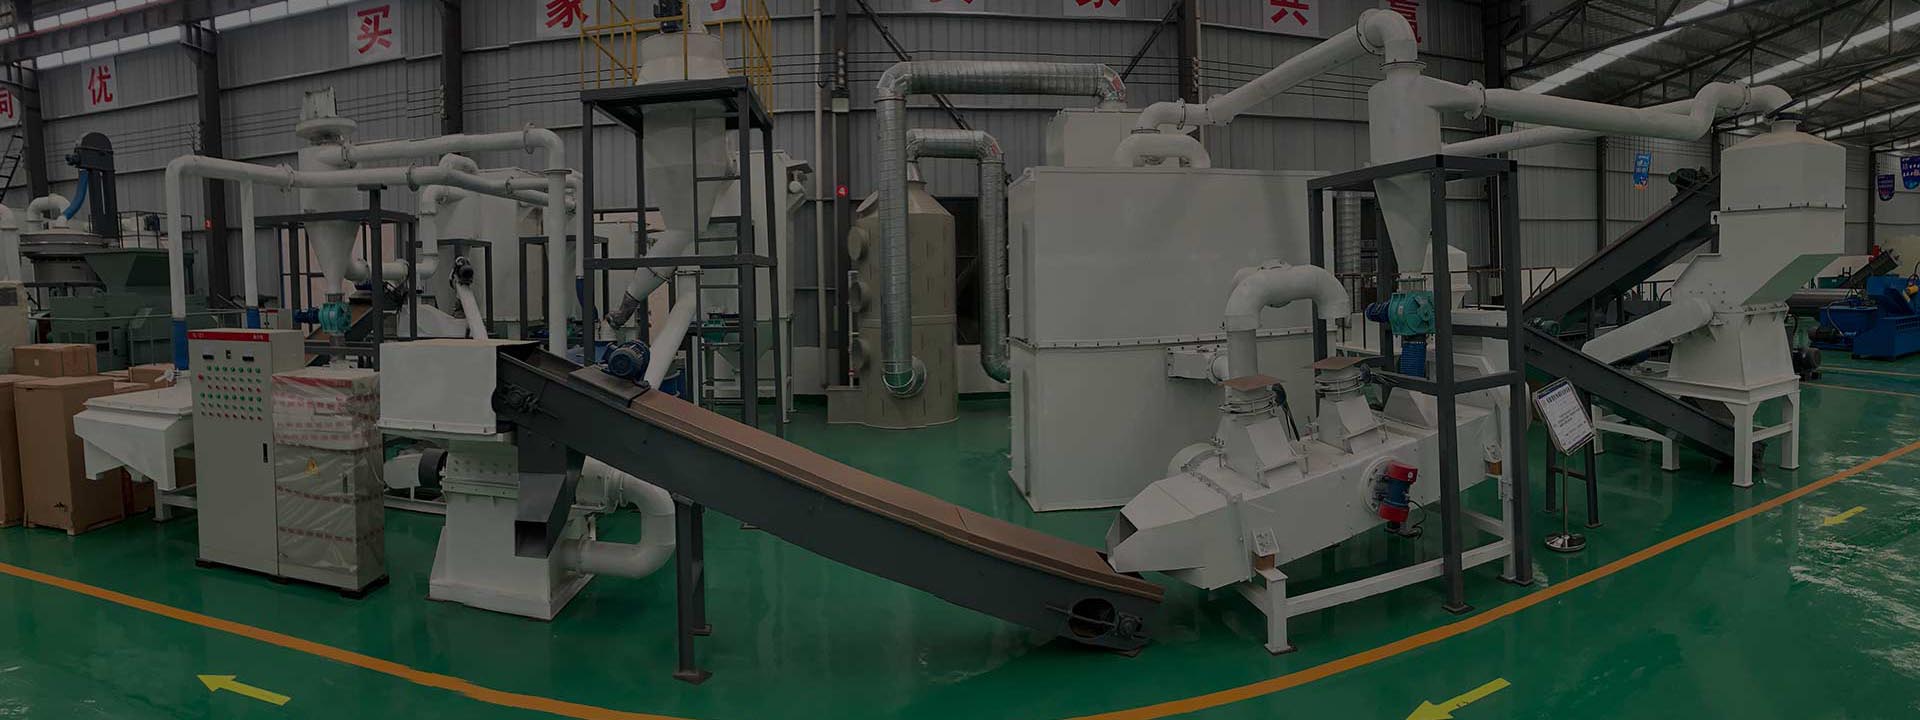 Waste capacitor crushing and recycling equipment